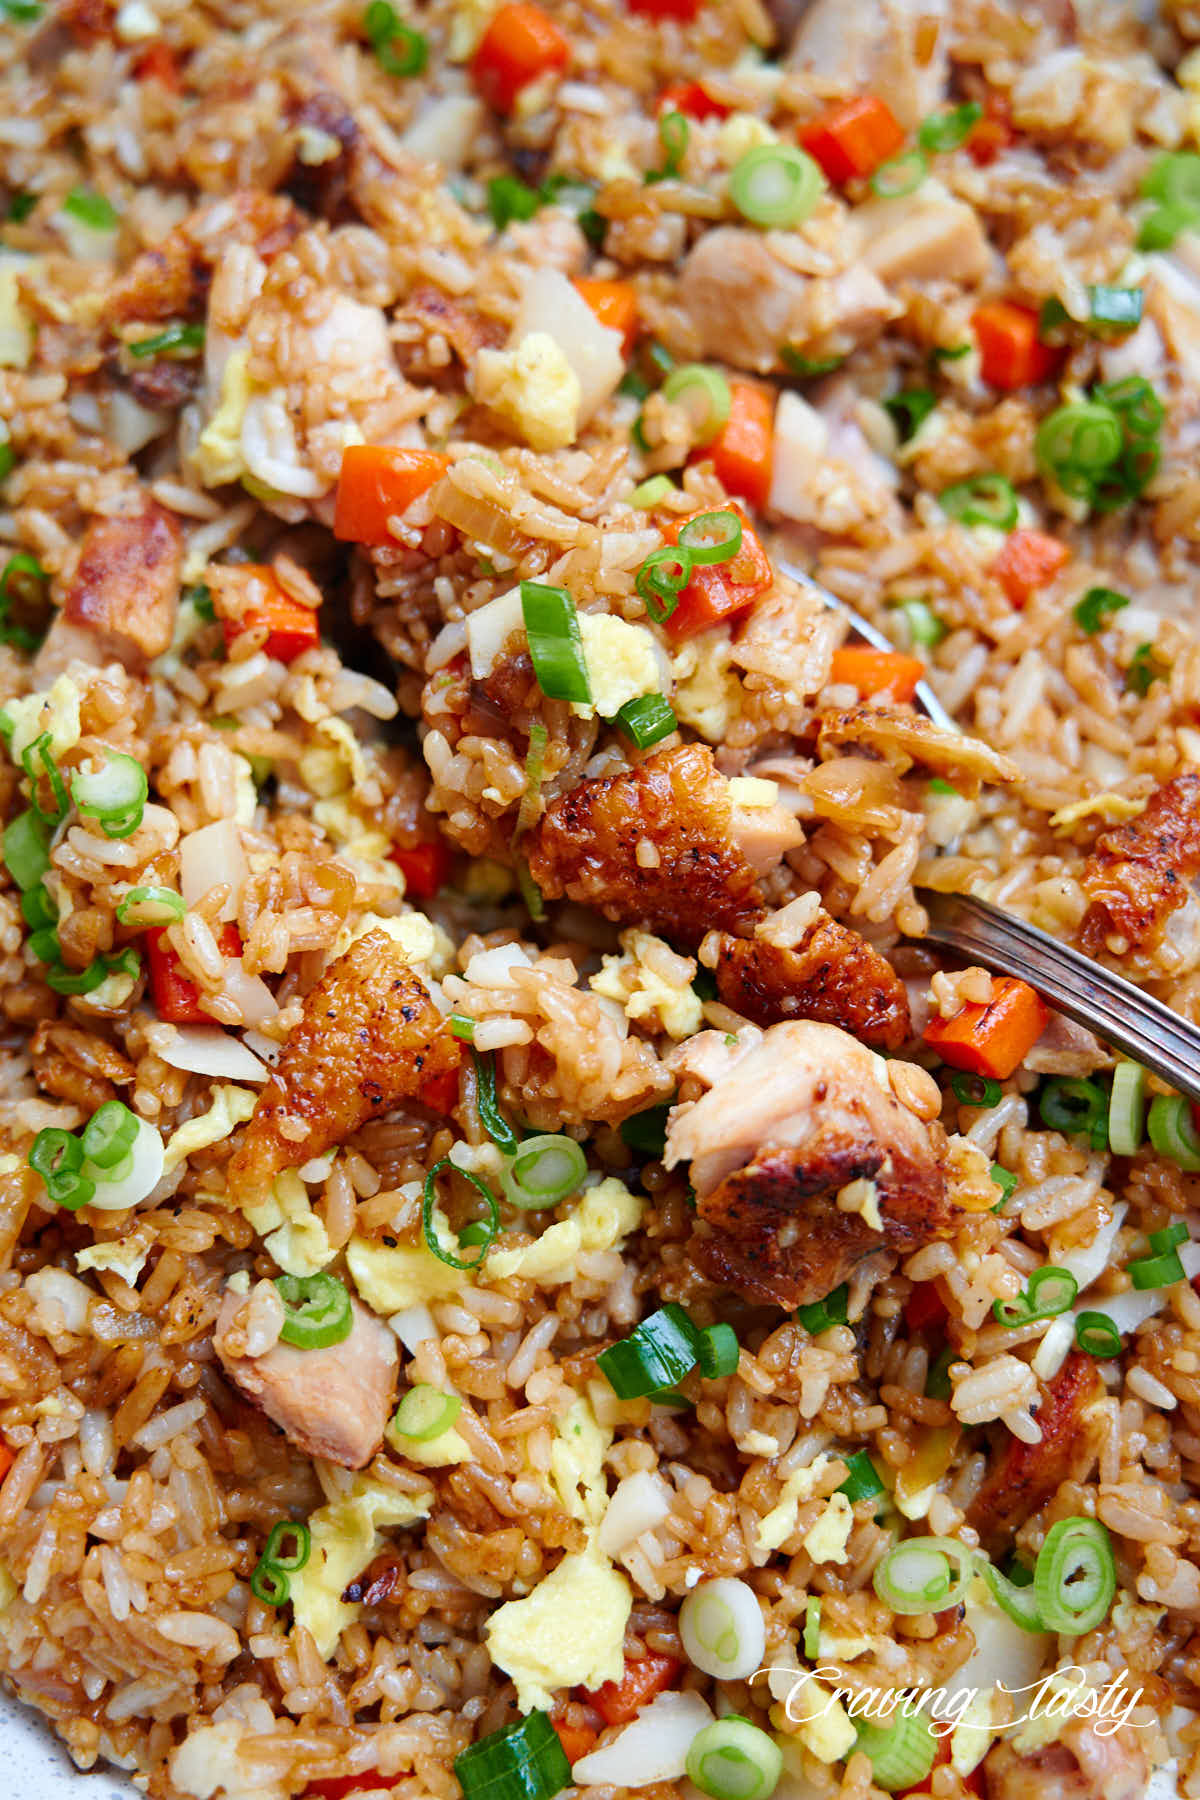 Close up of chicken pieces with rice and vegetables.